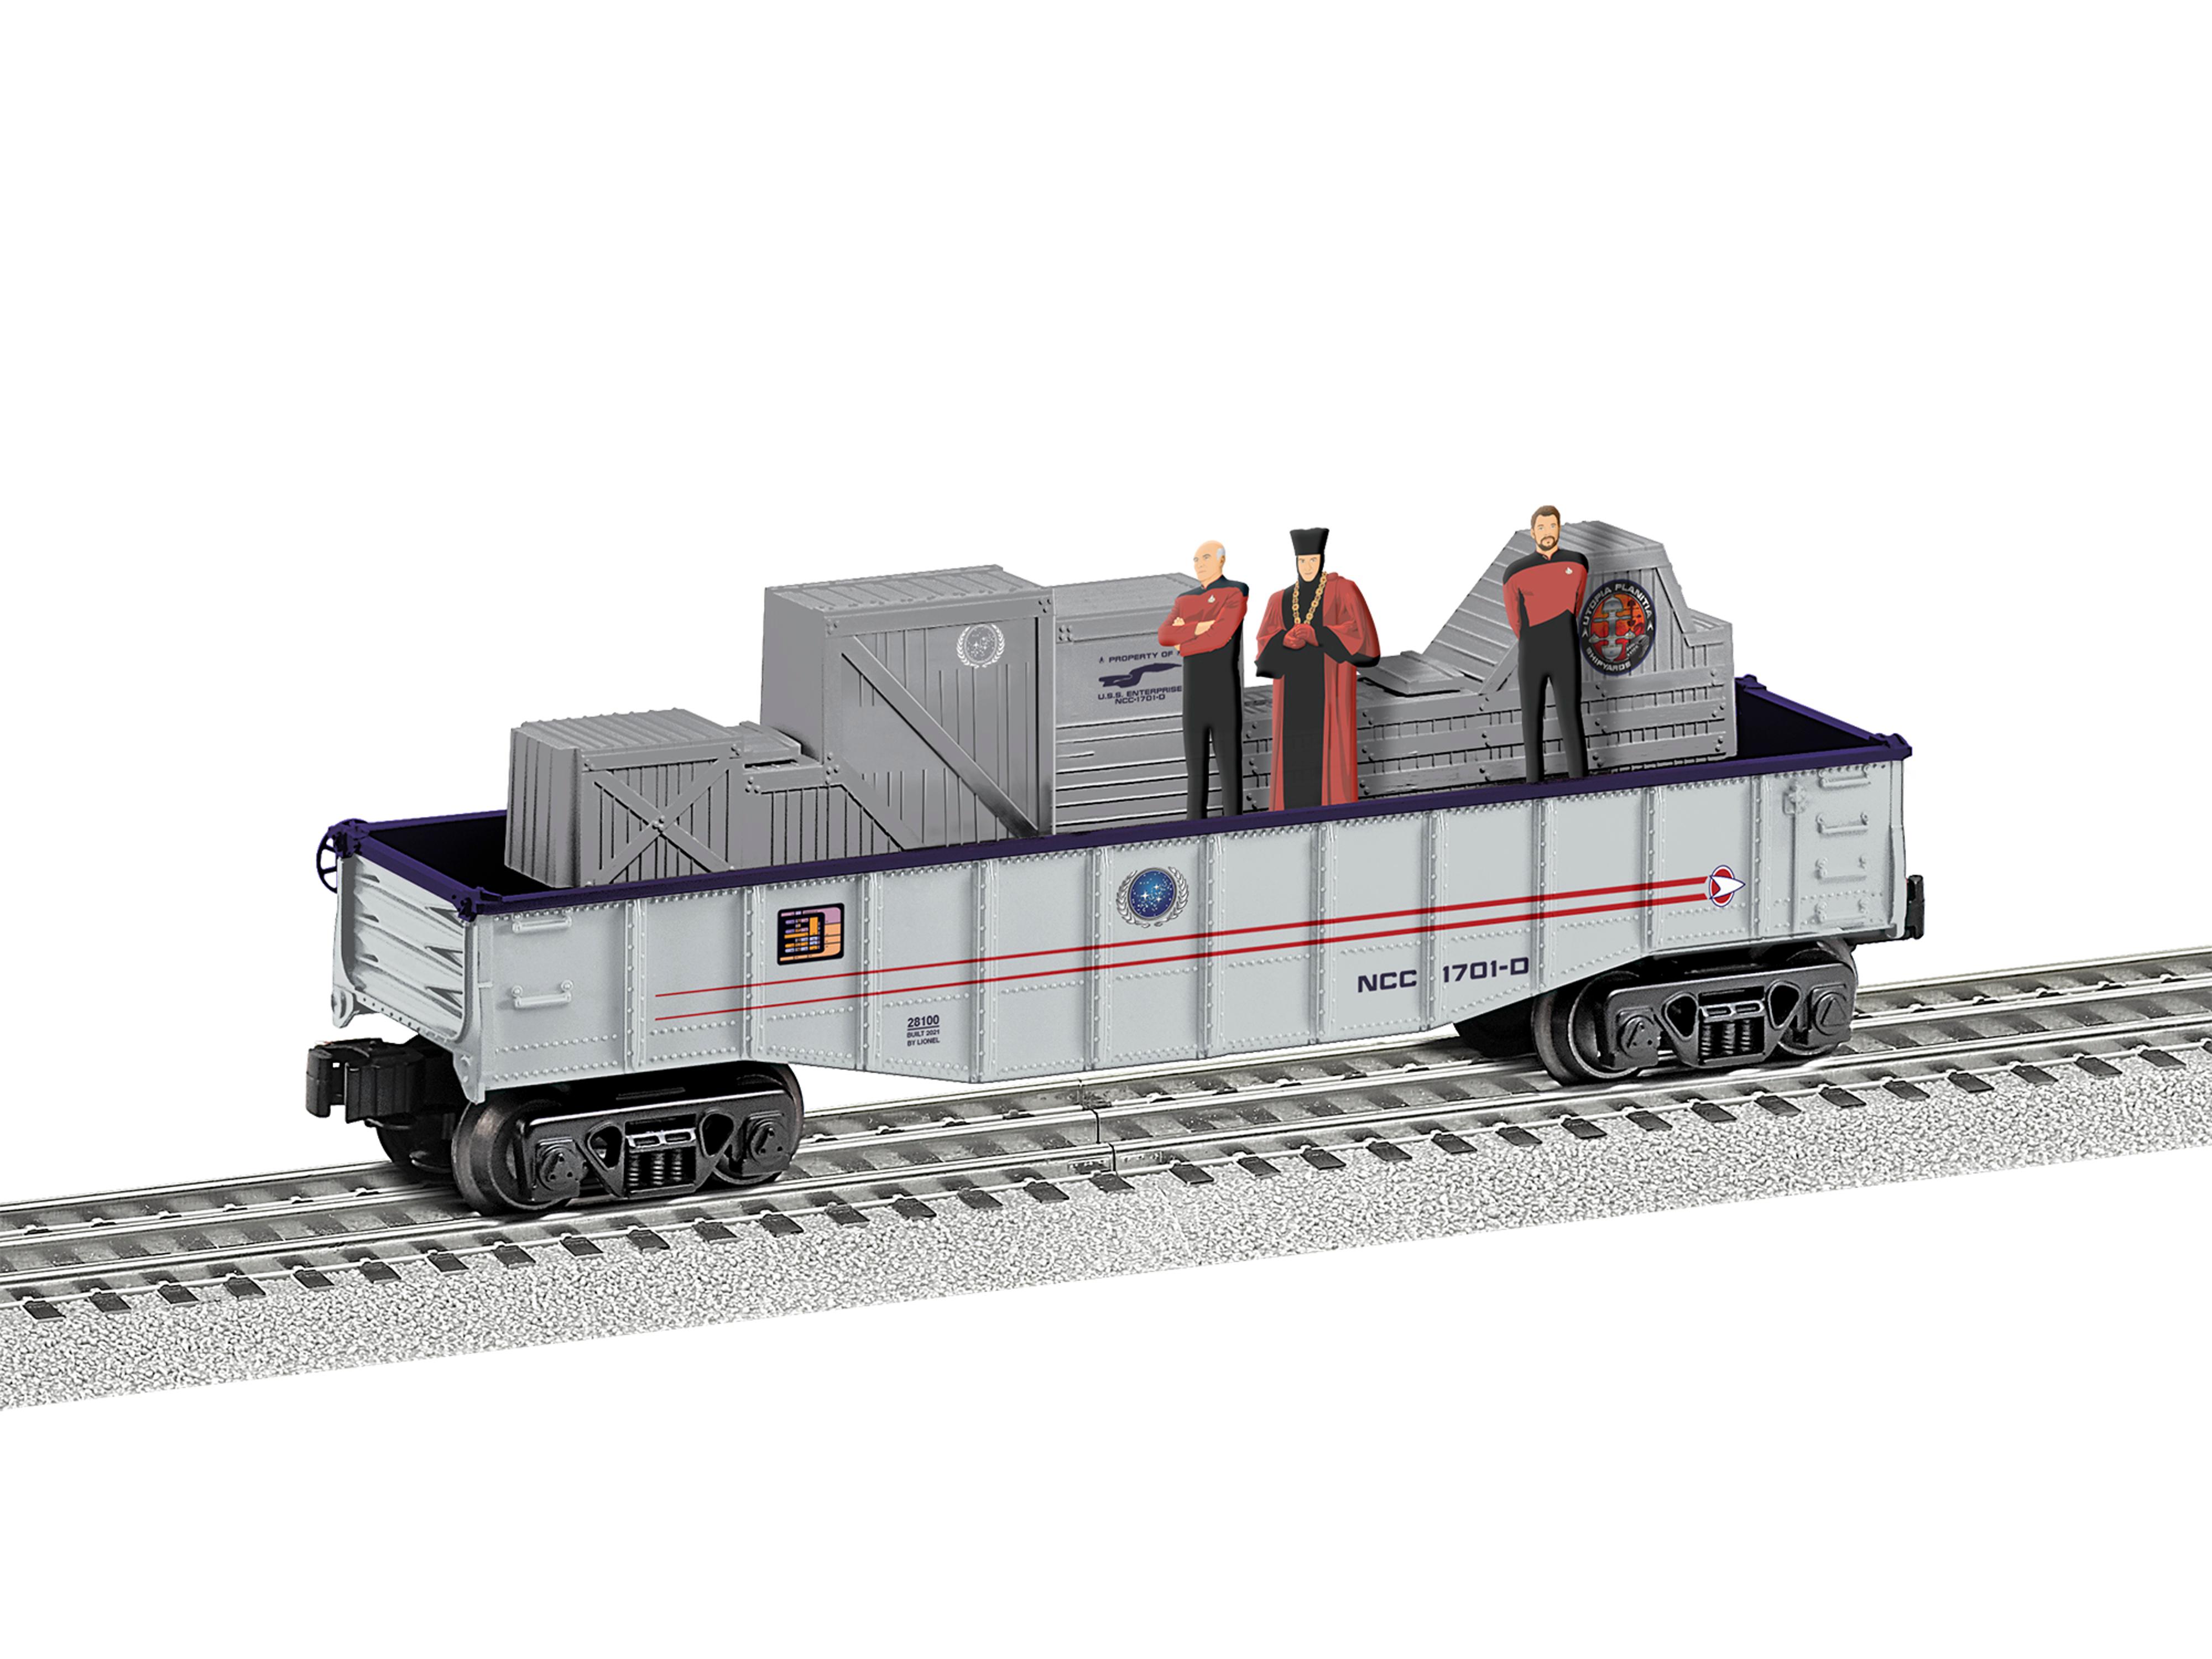 Lionel O Scale Chasing Gondola - Riker, Picard, and Q